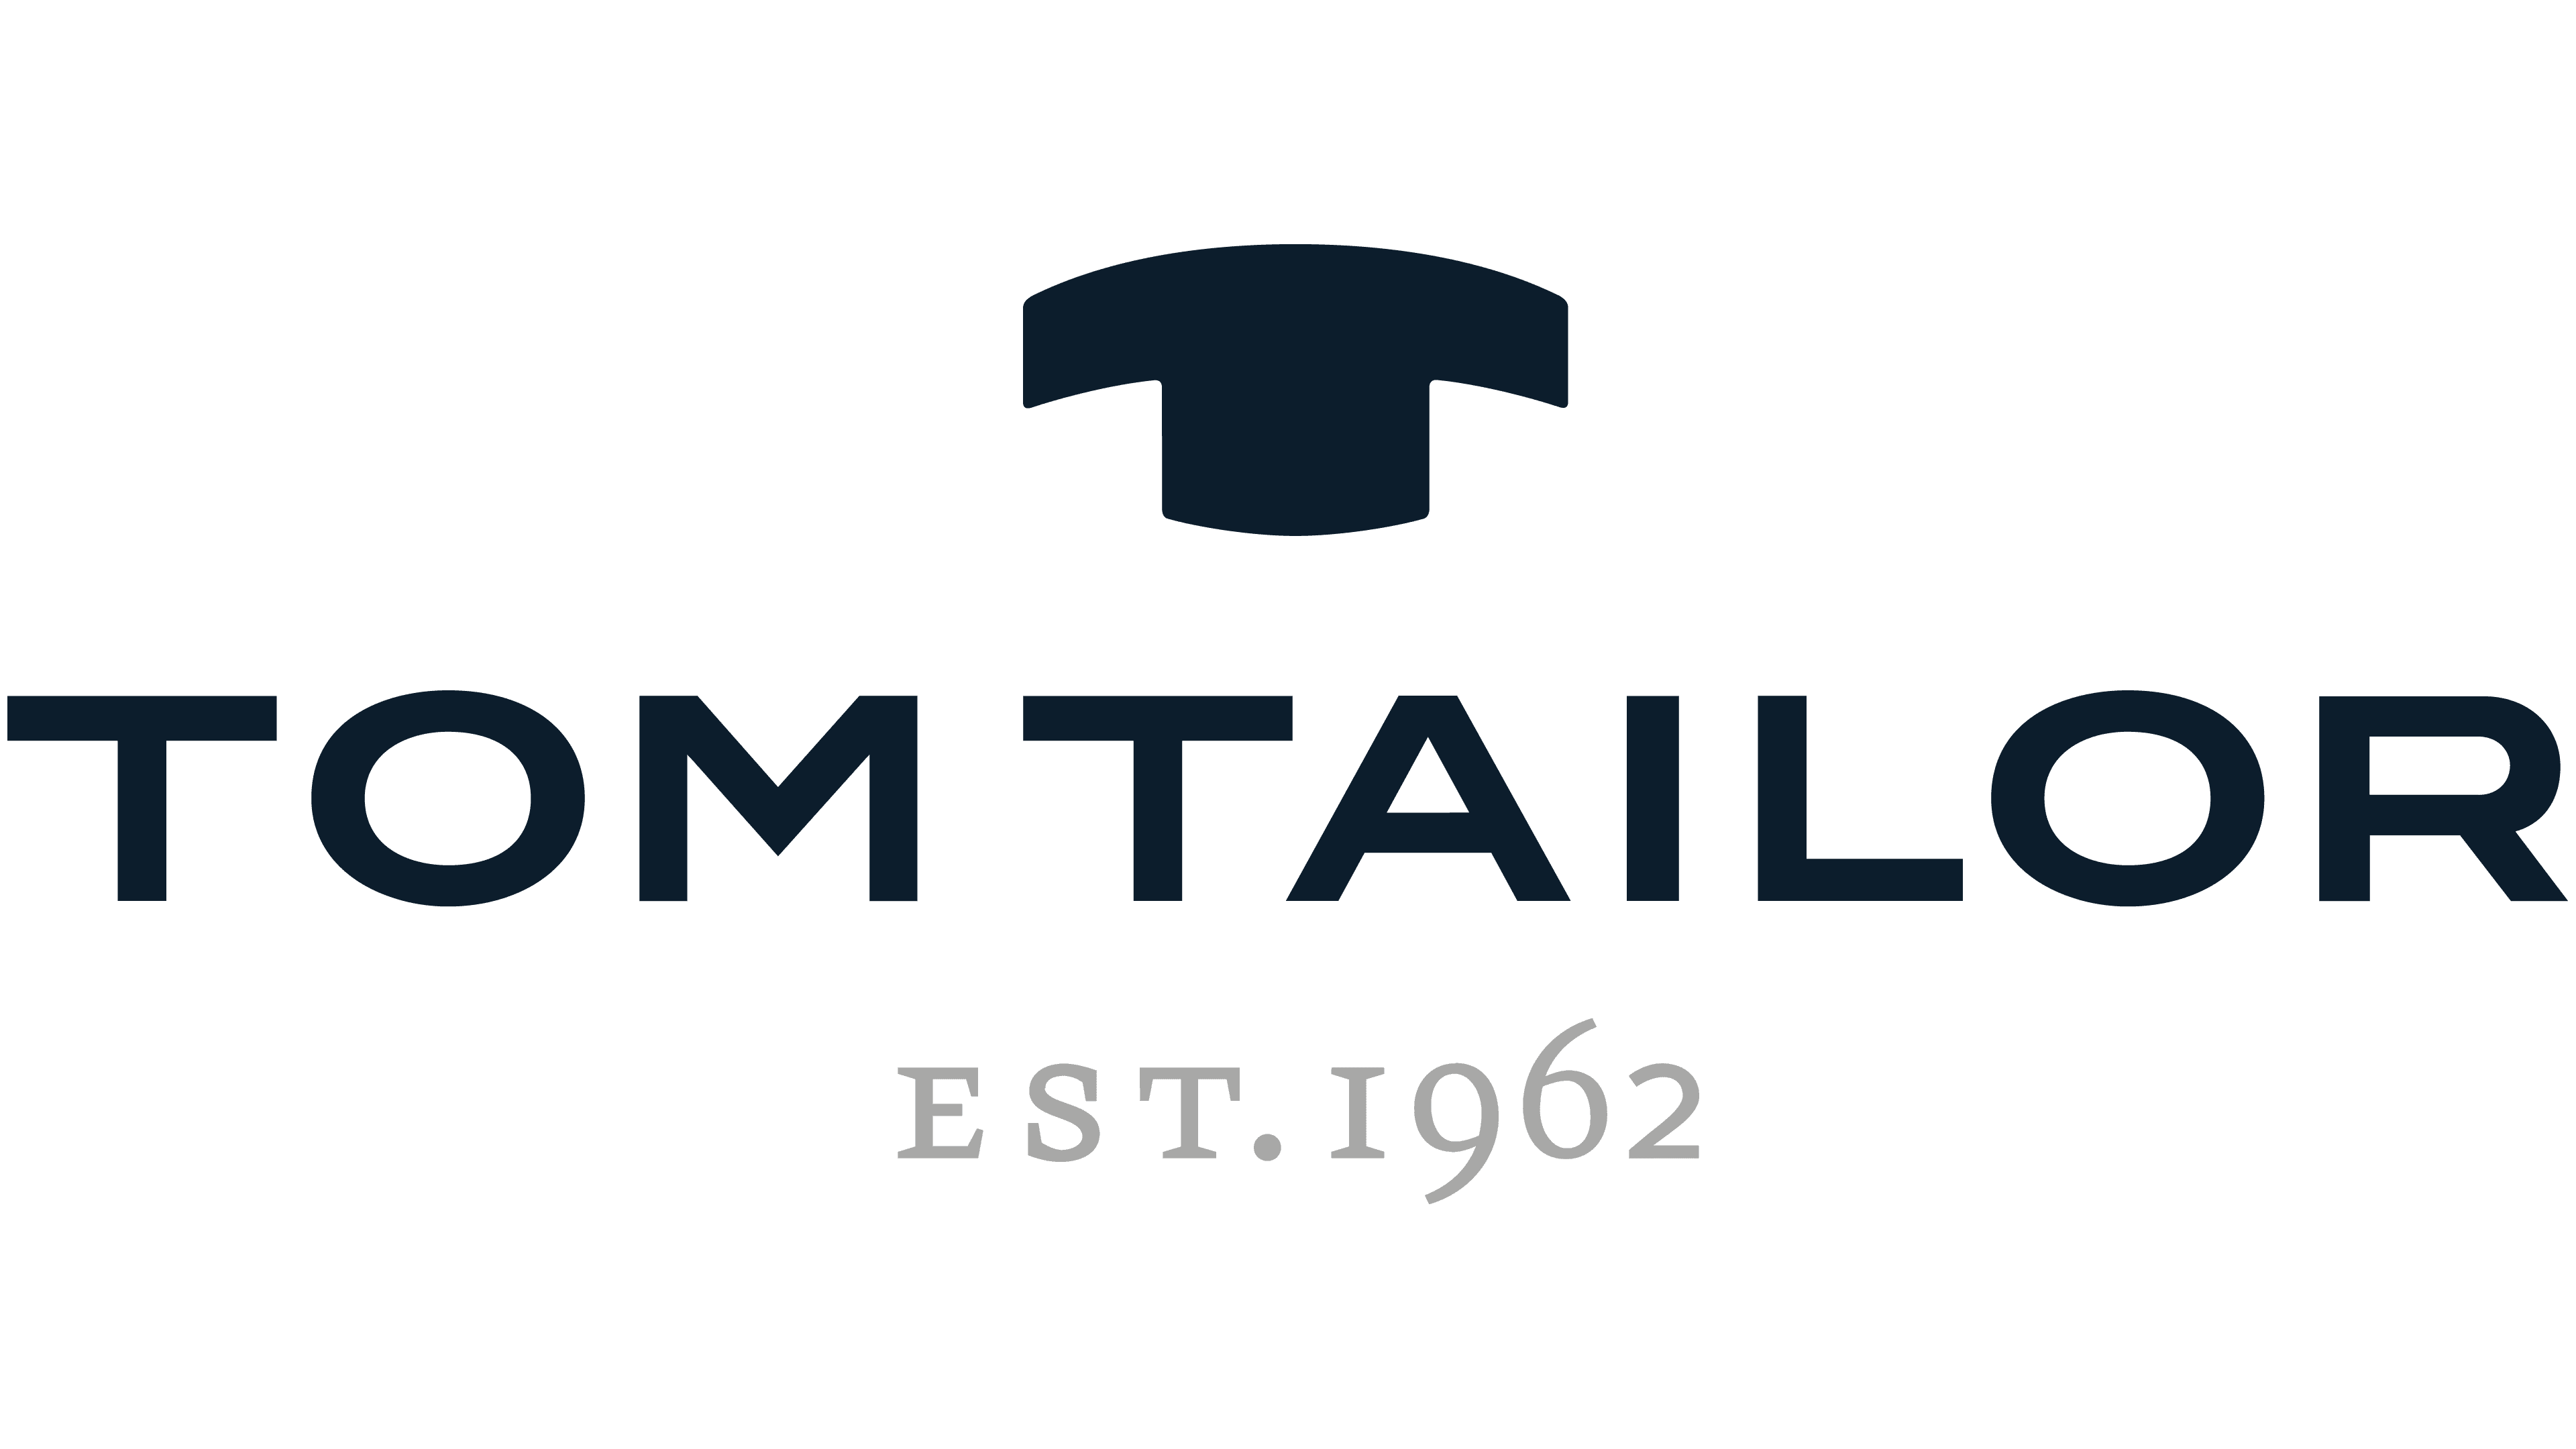 meaning, history, Logo PNG, Tom Tailor symbol, and brand